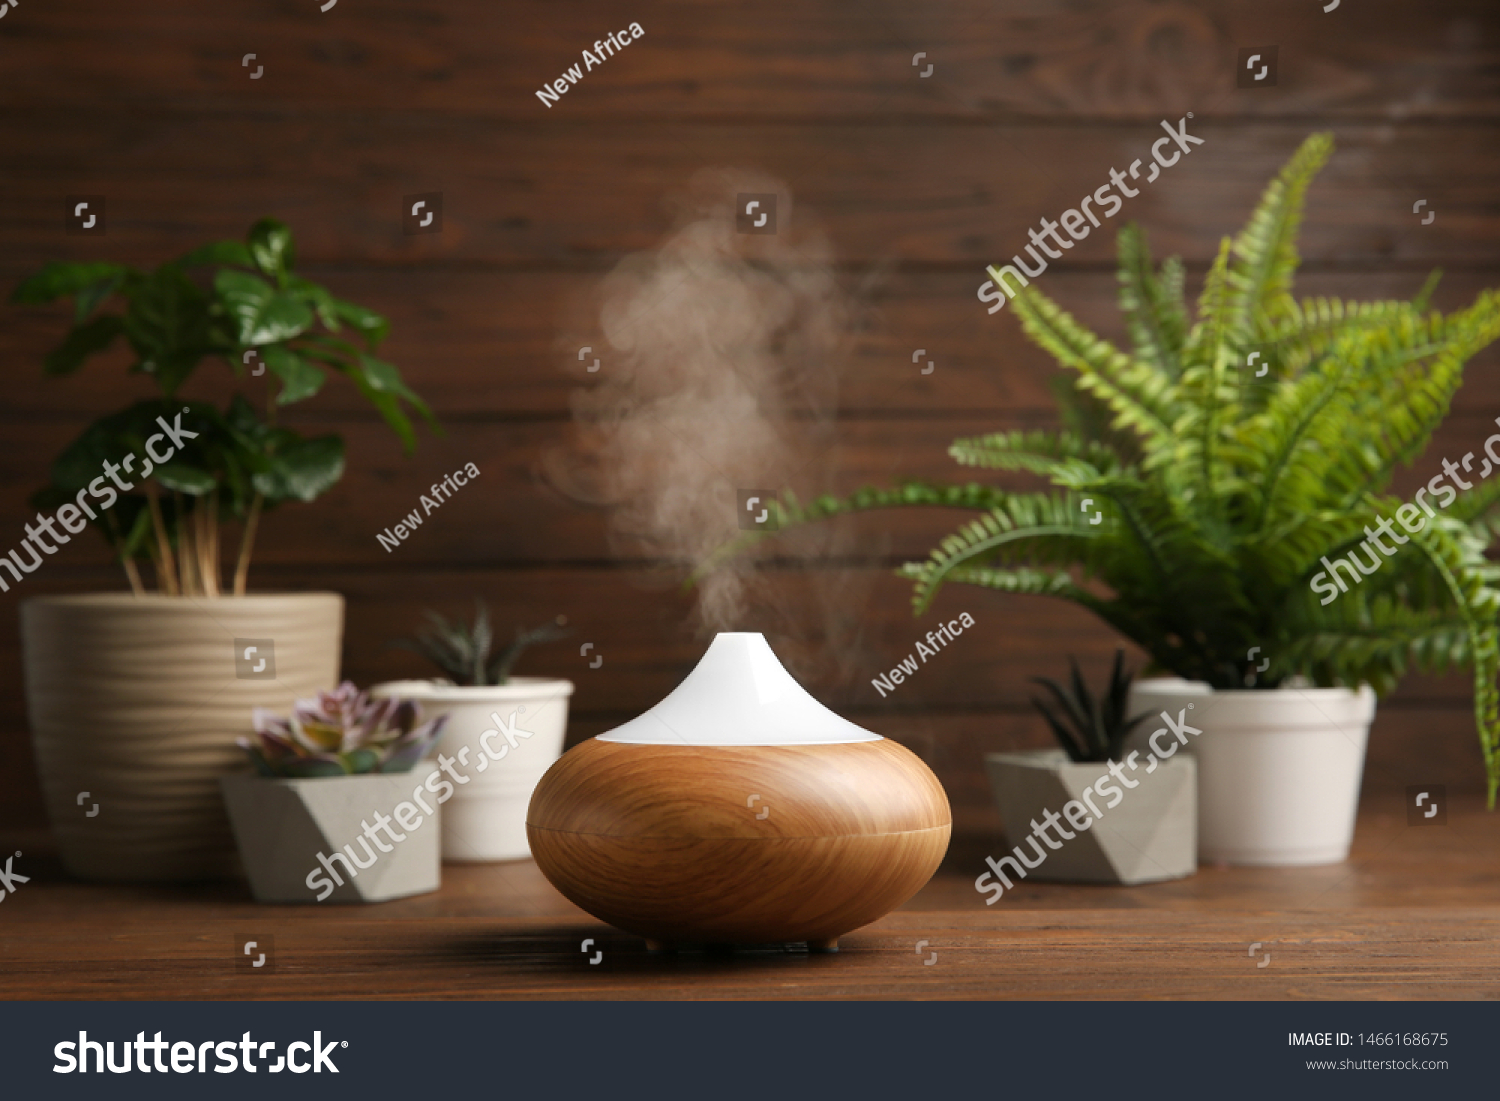 Composition with modern essential oil diffuser on wooden table against brown background, space for text #1466168675